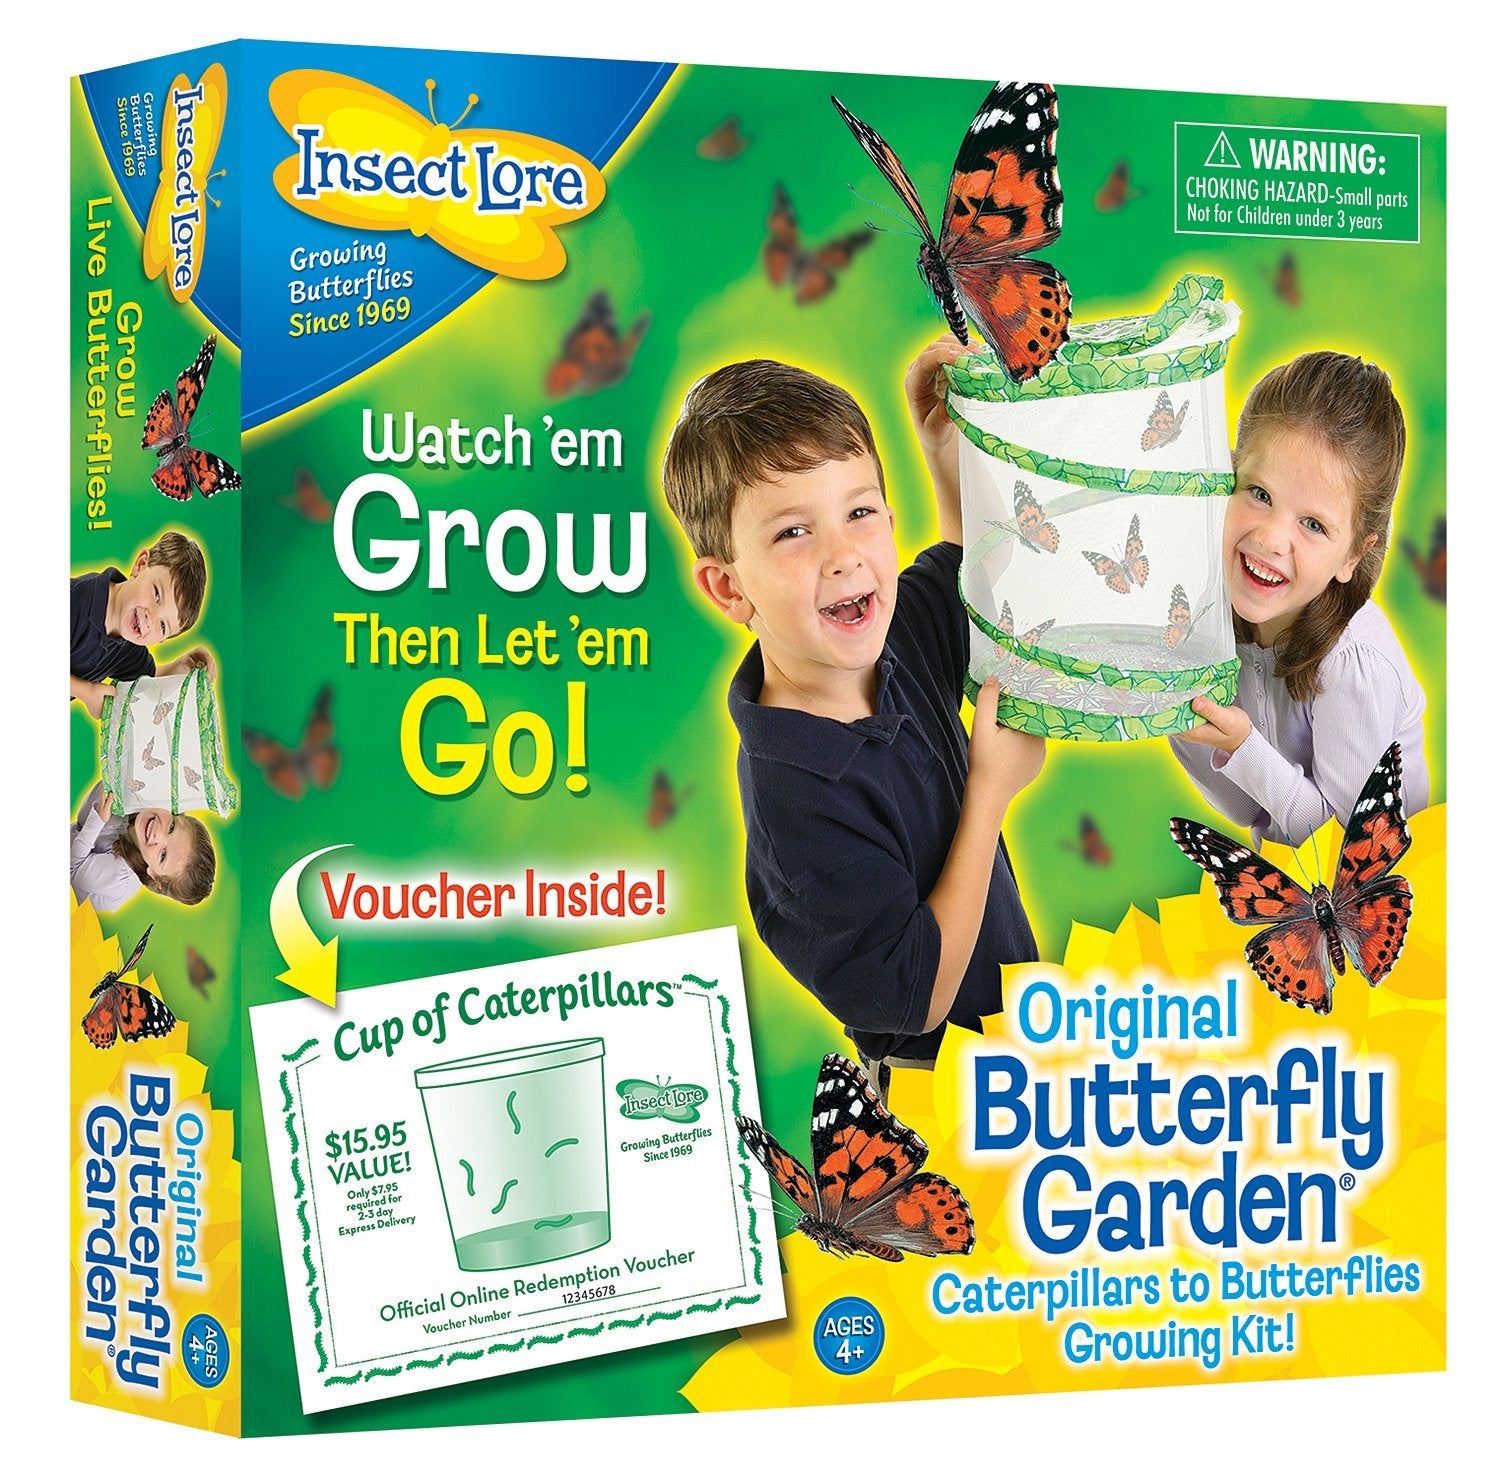 Insect Lore Original Butterfly Garden